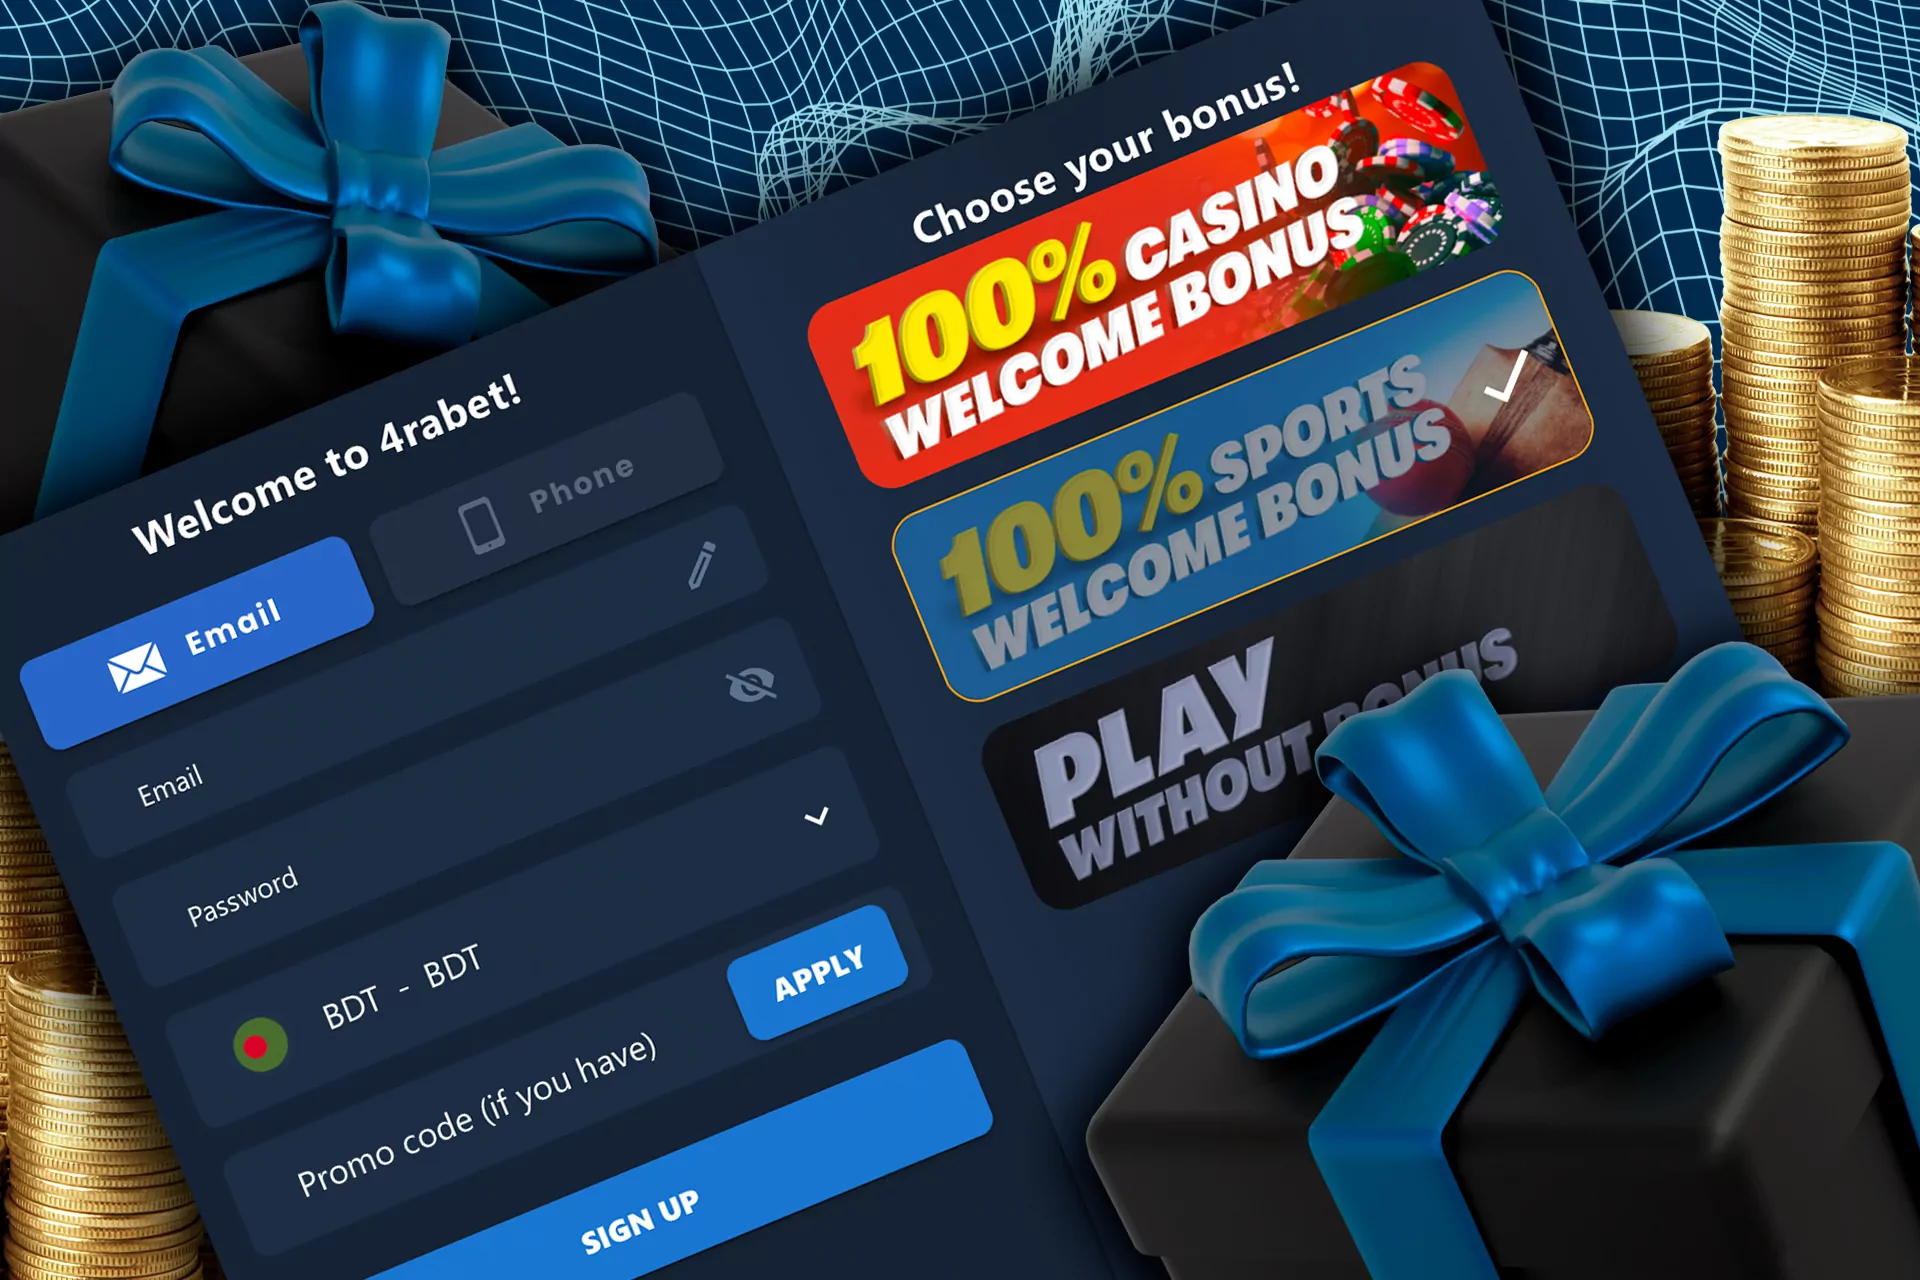 And the casino bonus you can also successfully withdraw once you win it back under these conditions.